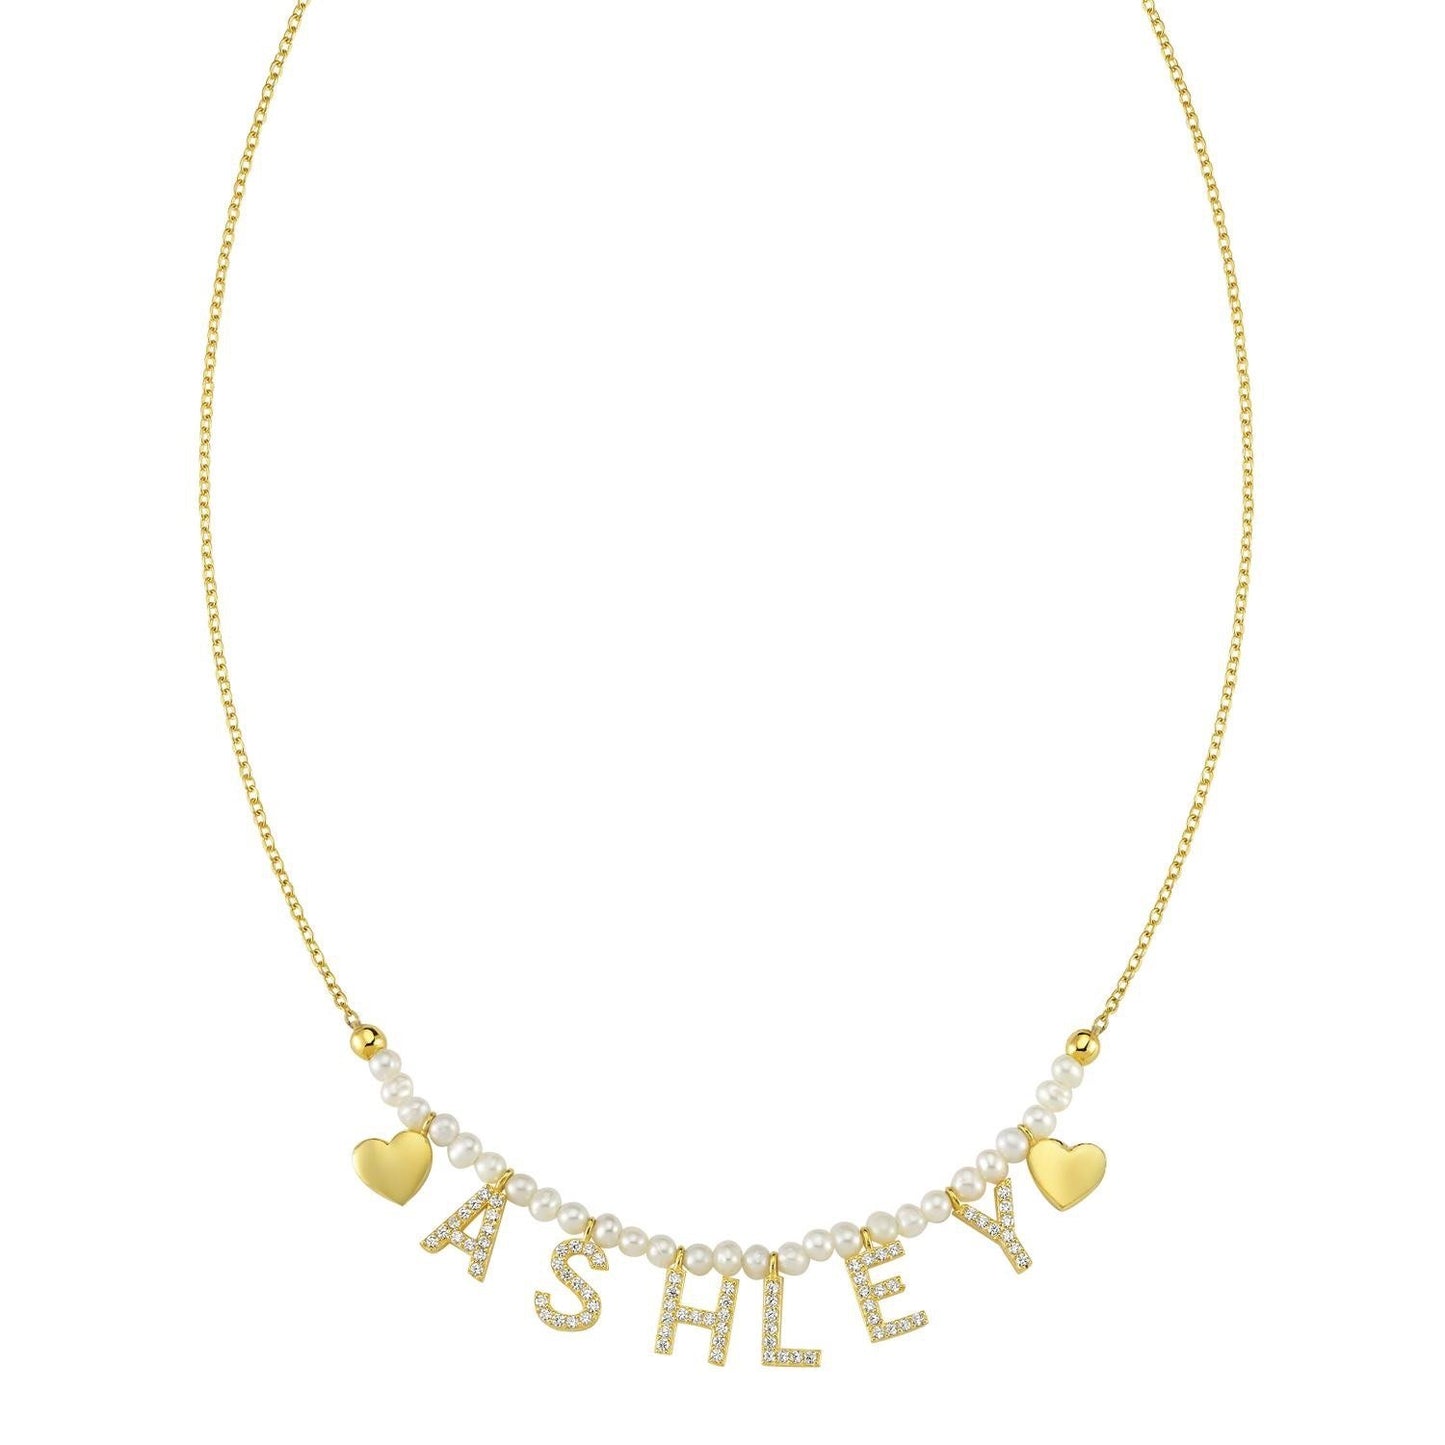 NON CUSTOMIZABLE Pearl, Gold It's All in a Name™ Necklace Ready to Ship JEWELRY The Sis Kiss 